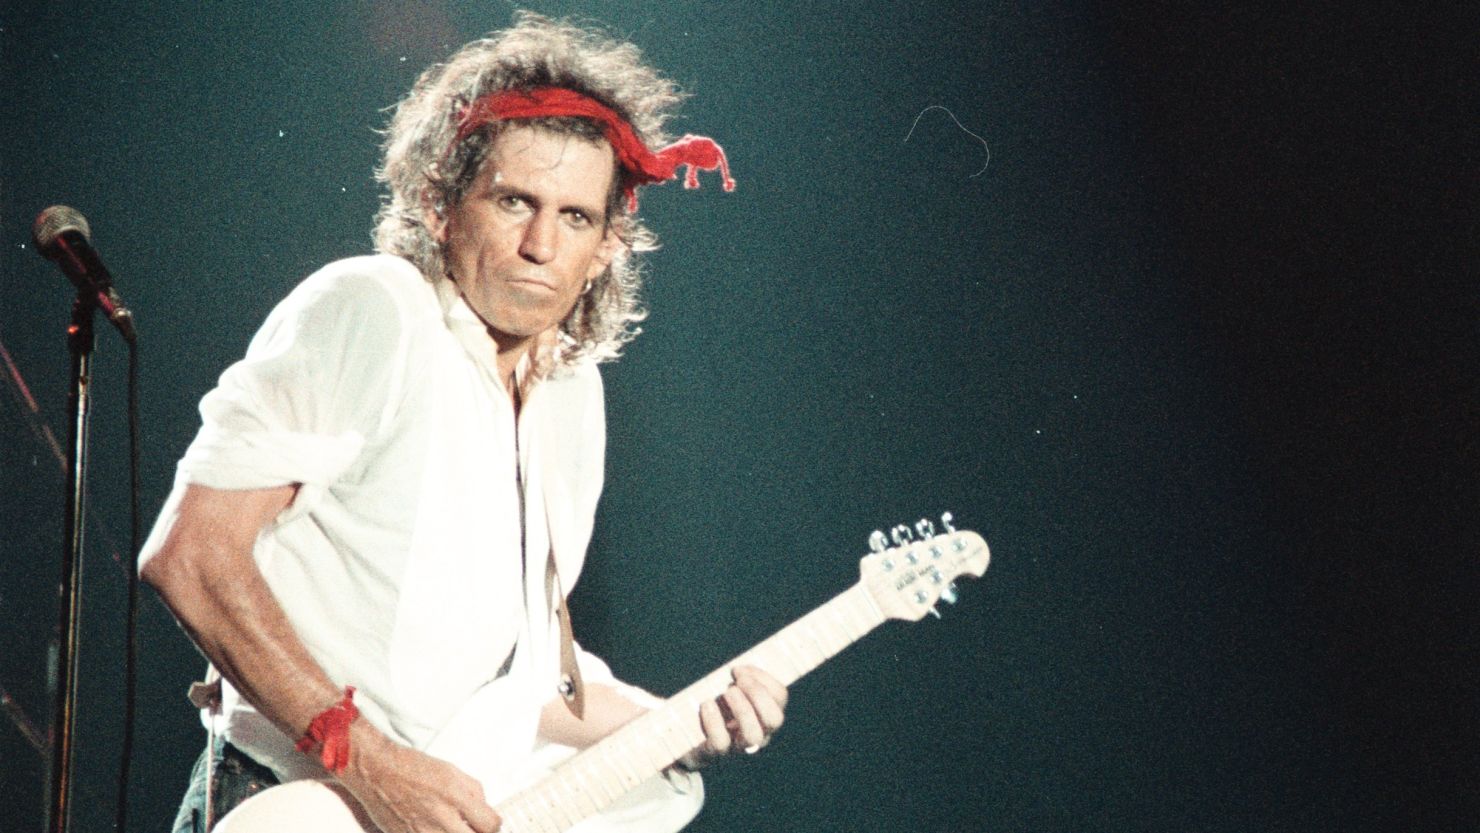 Keith Richards and The Rolling Stones nearly got into a knife